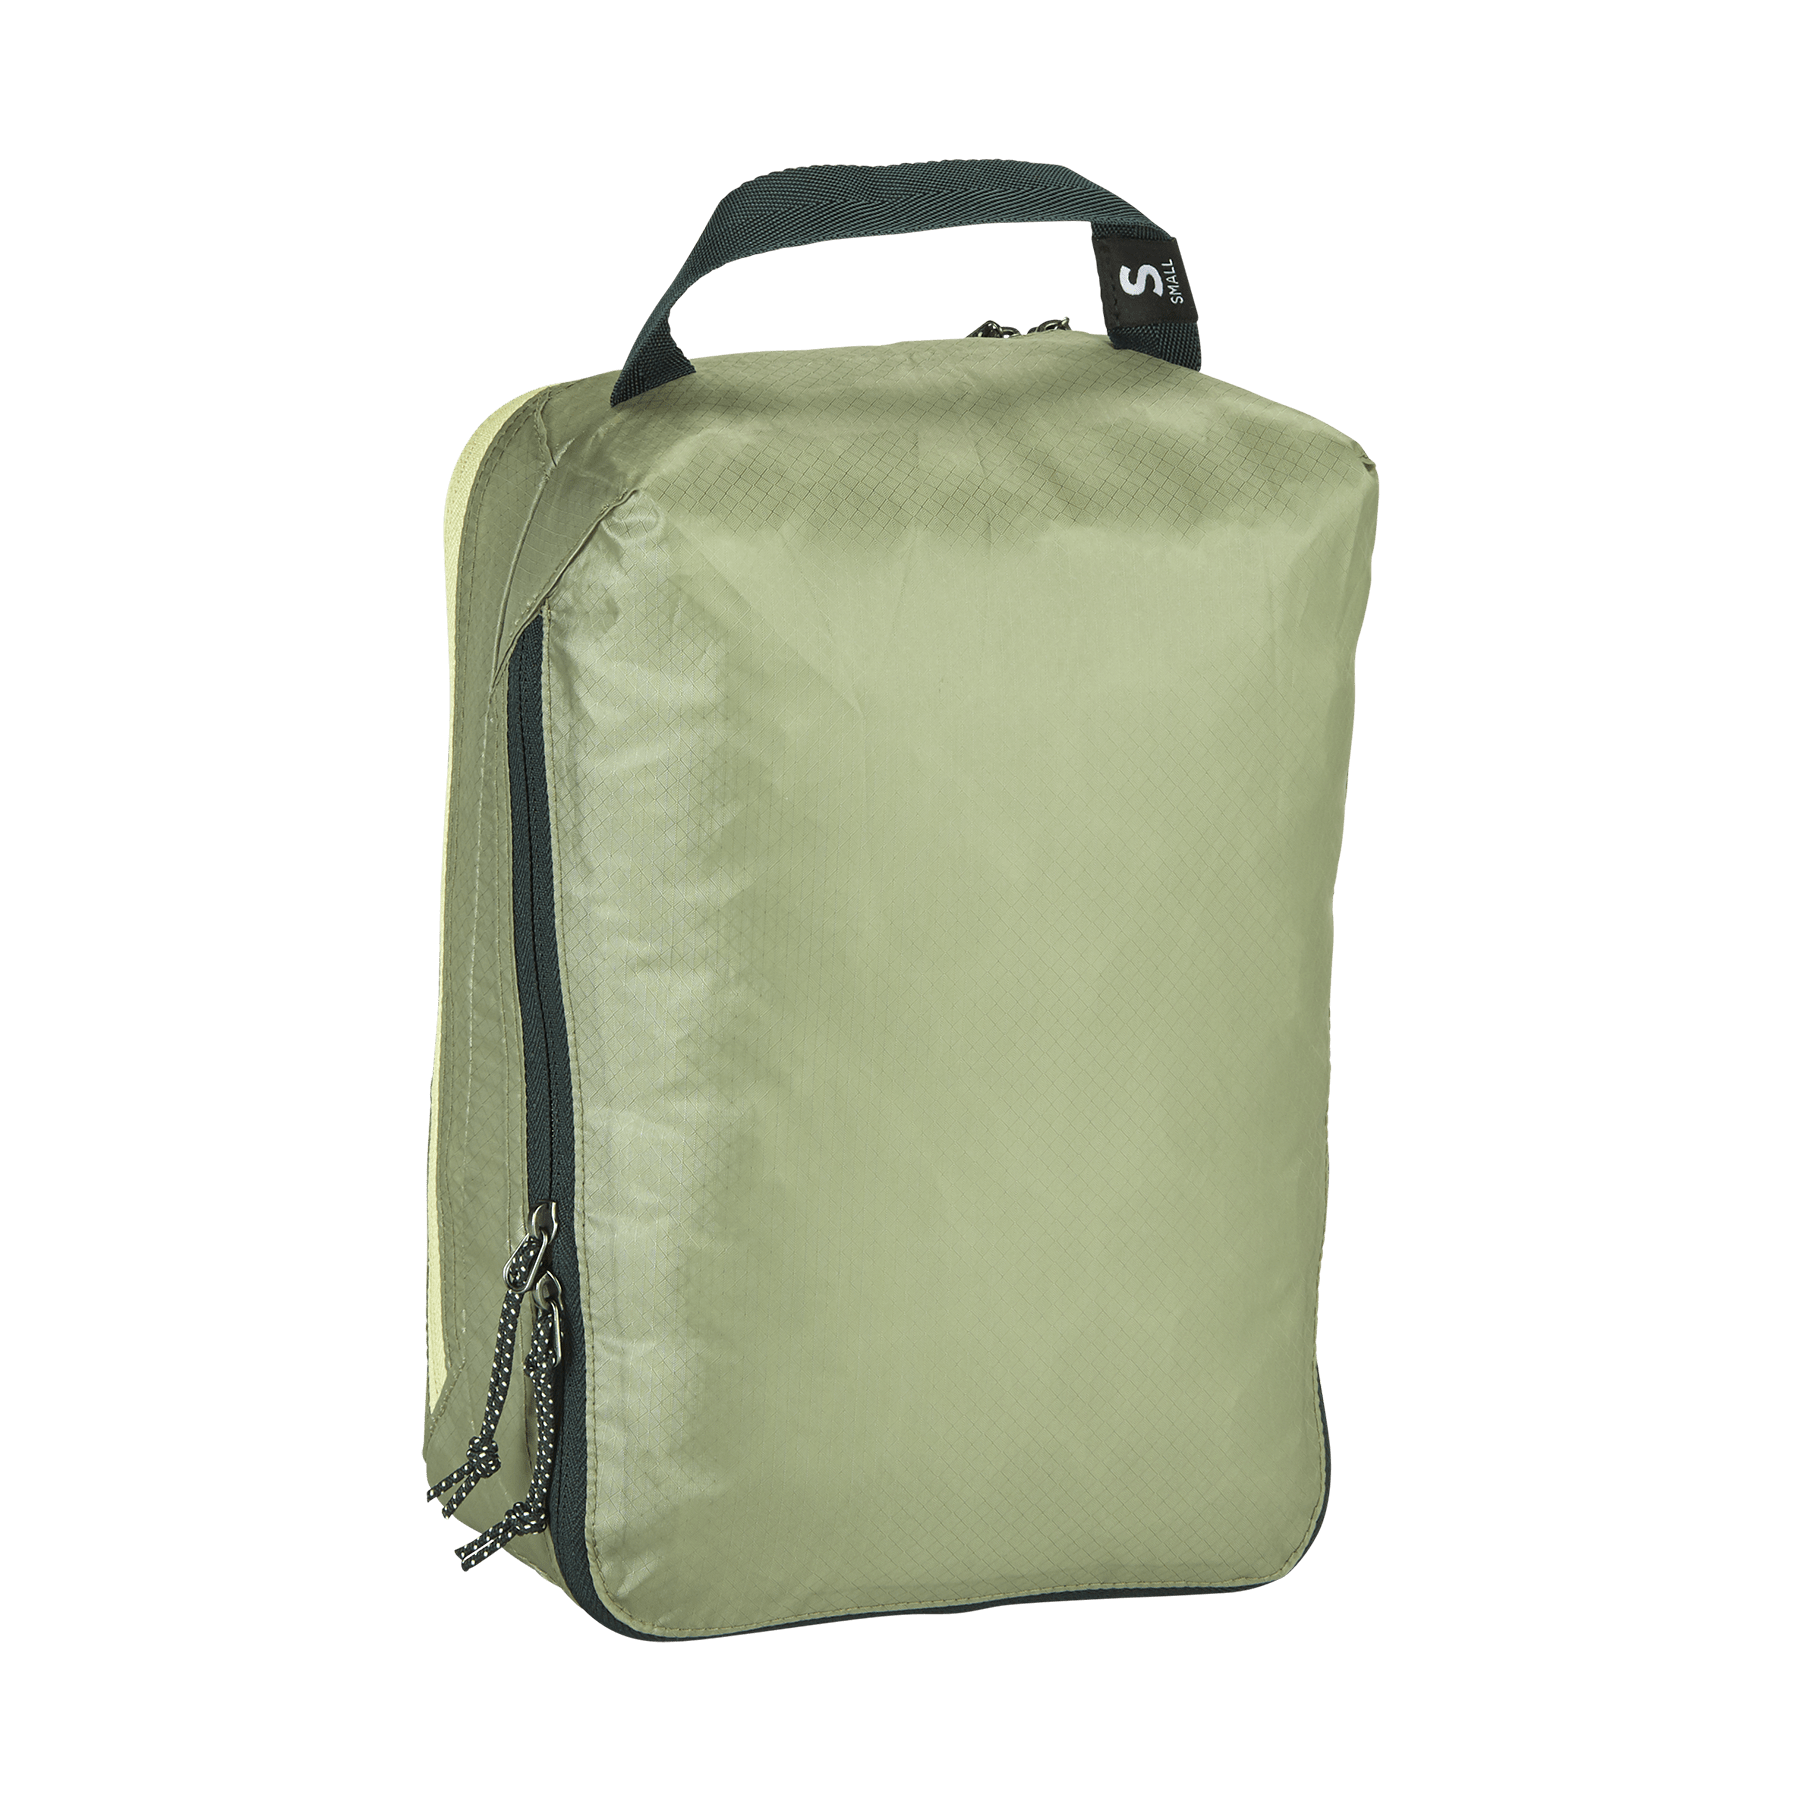 Eagle Creek PACK-IT Isolate Clean/Dirty Cube - Small